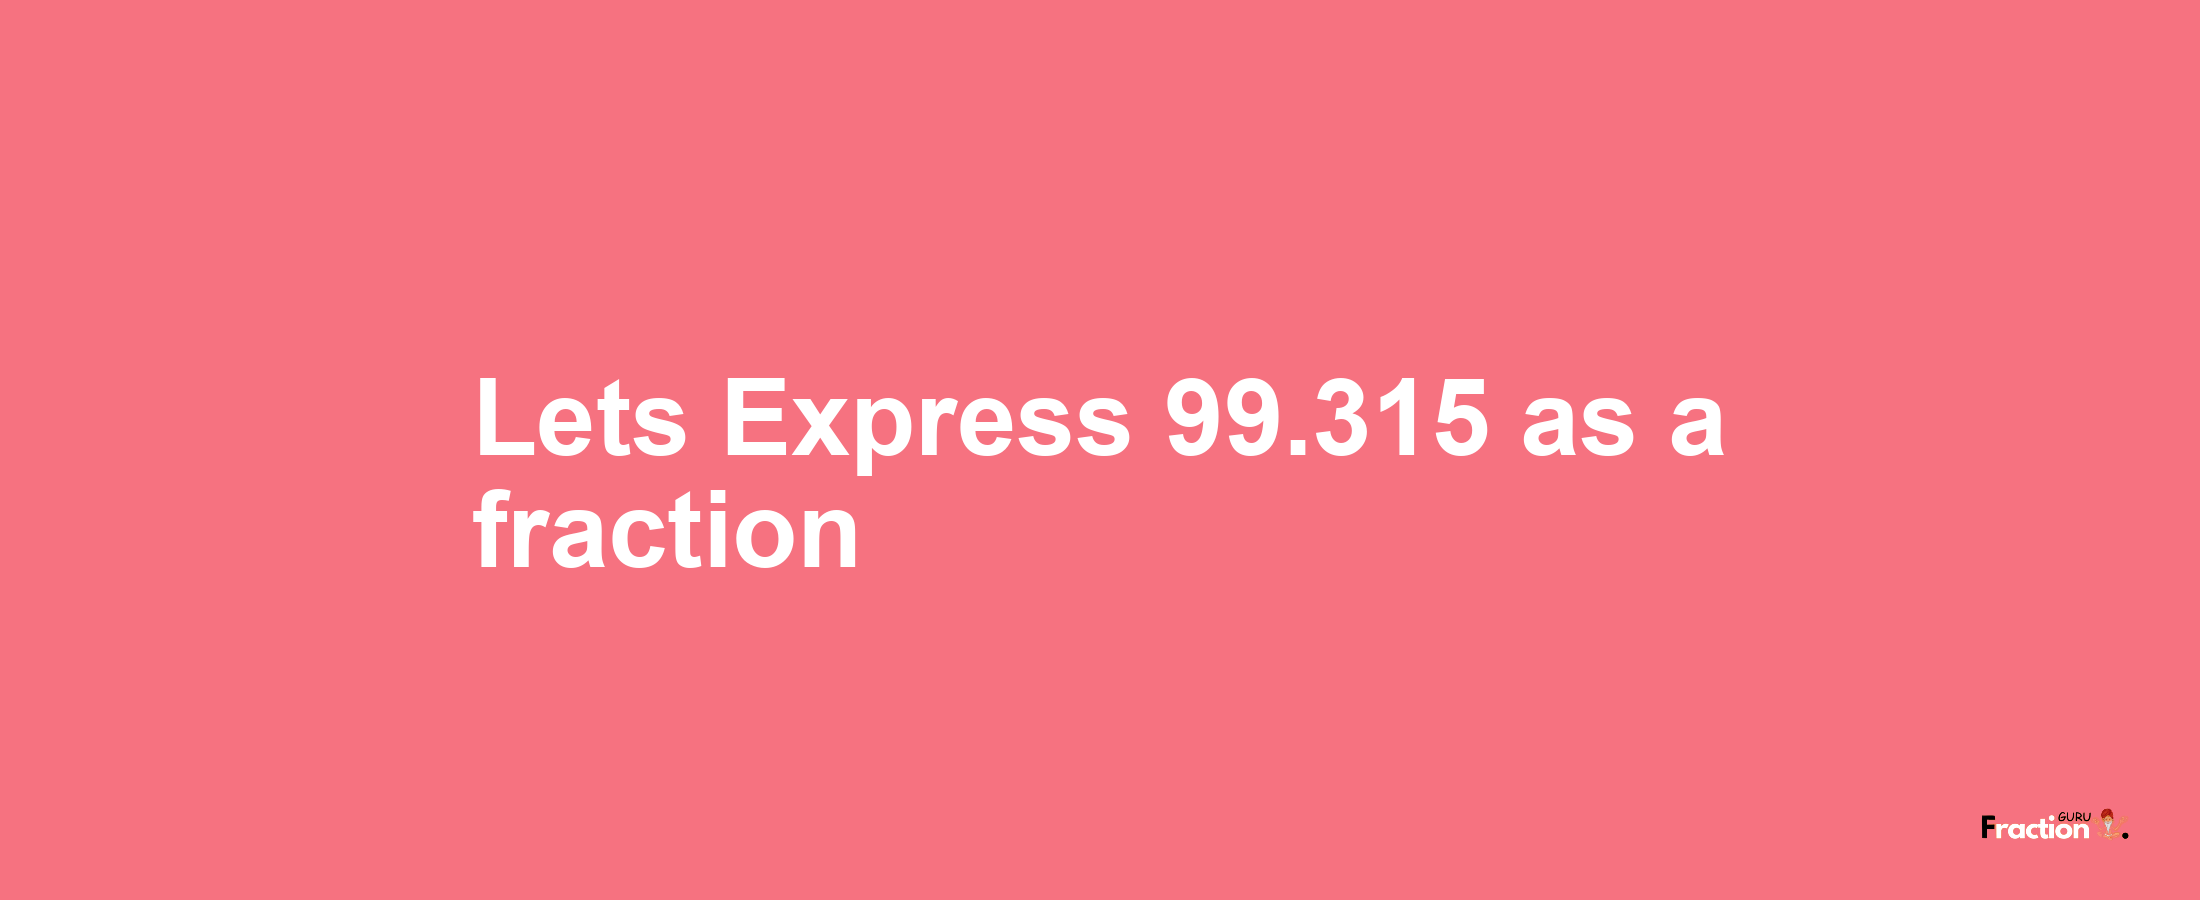 Lets Express 99.315 as afraction